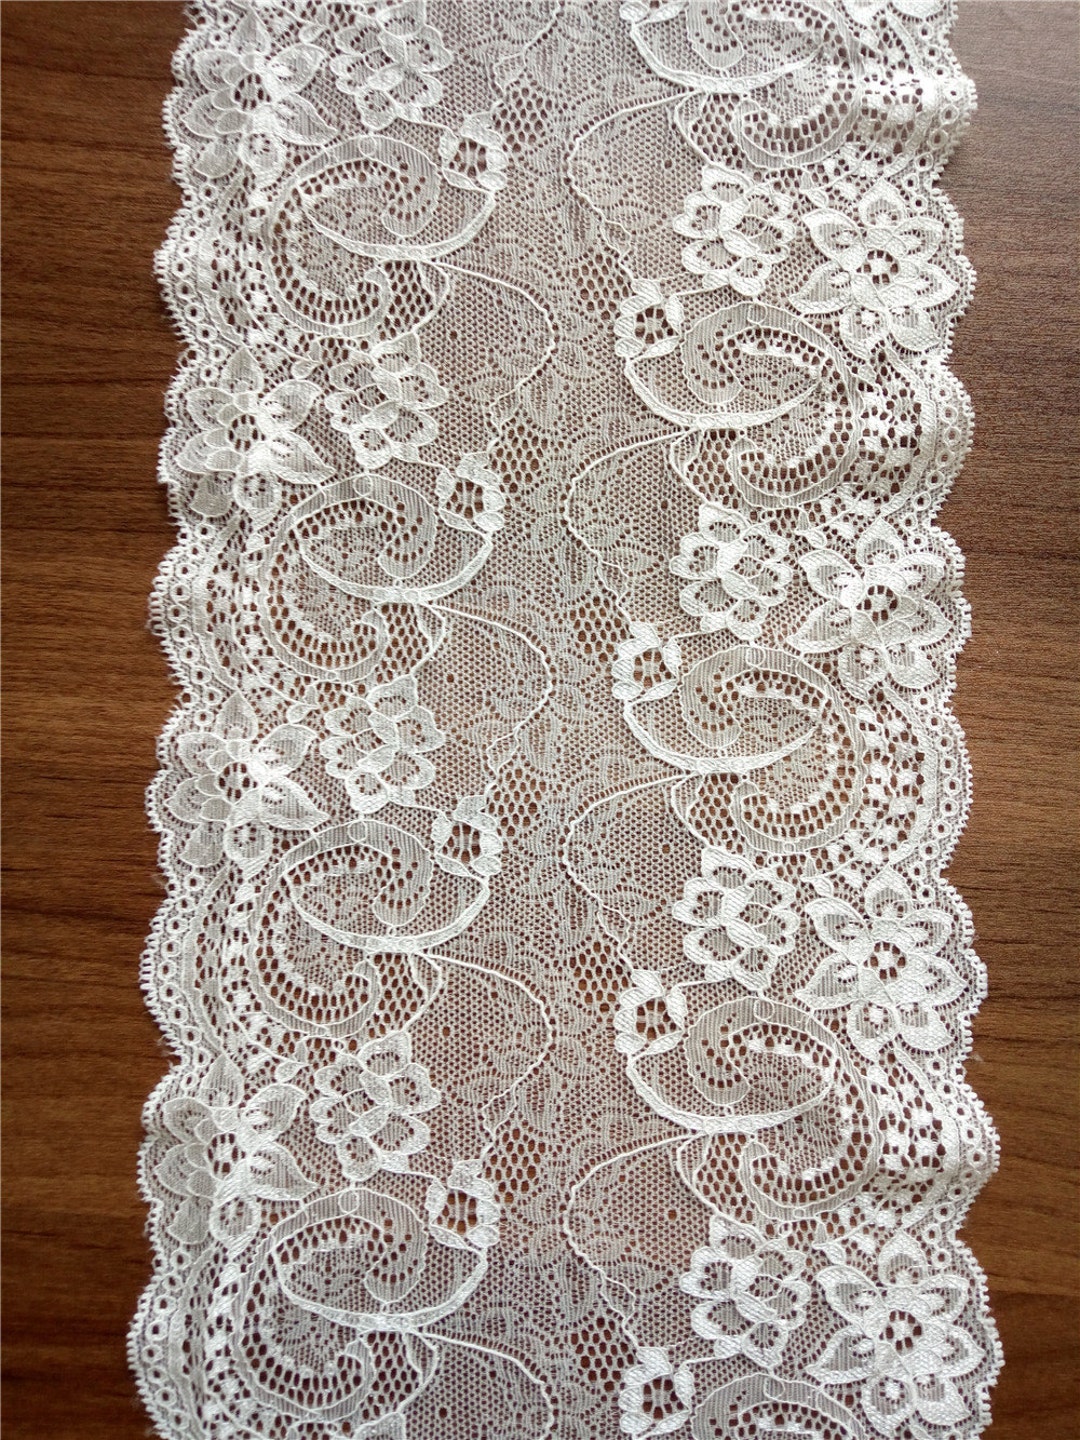 White Table Runners, 7 , Wedding Runners, Lace Table Runner, Table ...